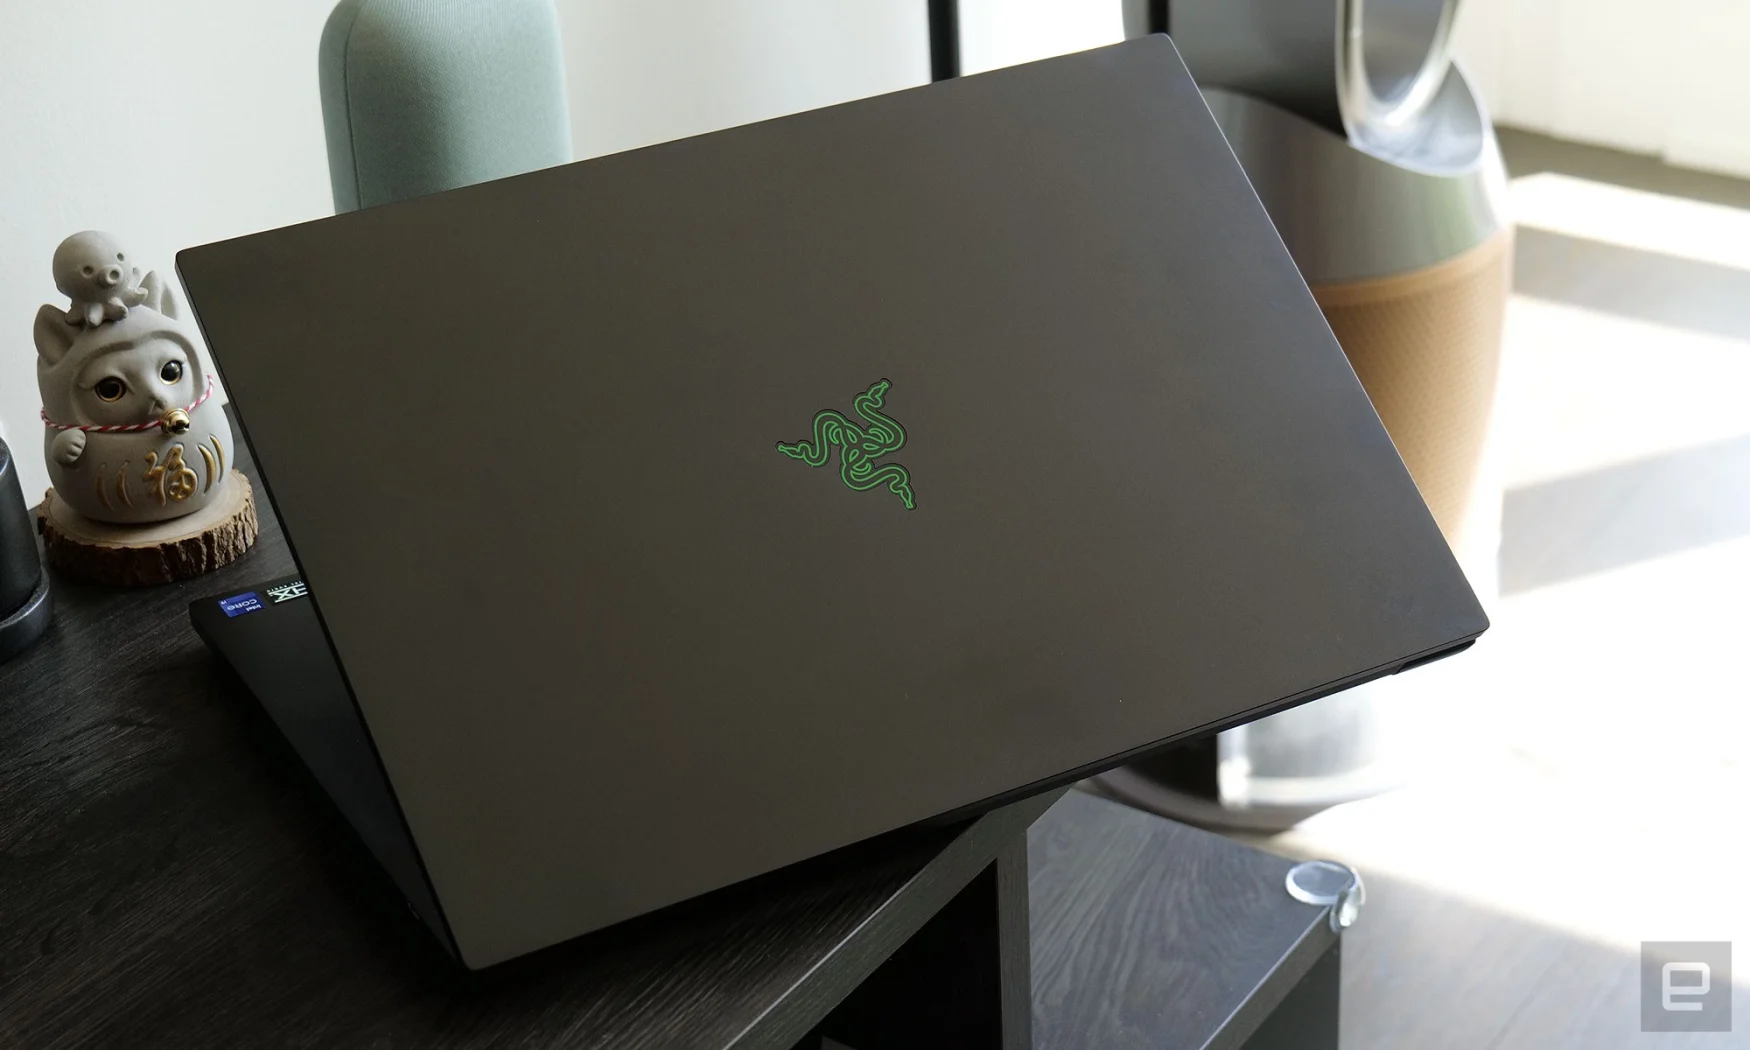 Razer's signature unibody aluminum design is still one of the nicest chassis on any gaming laptop today. 